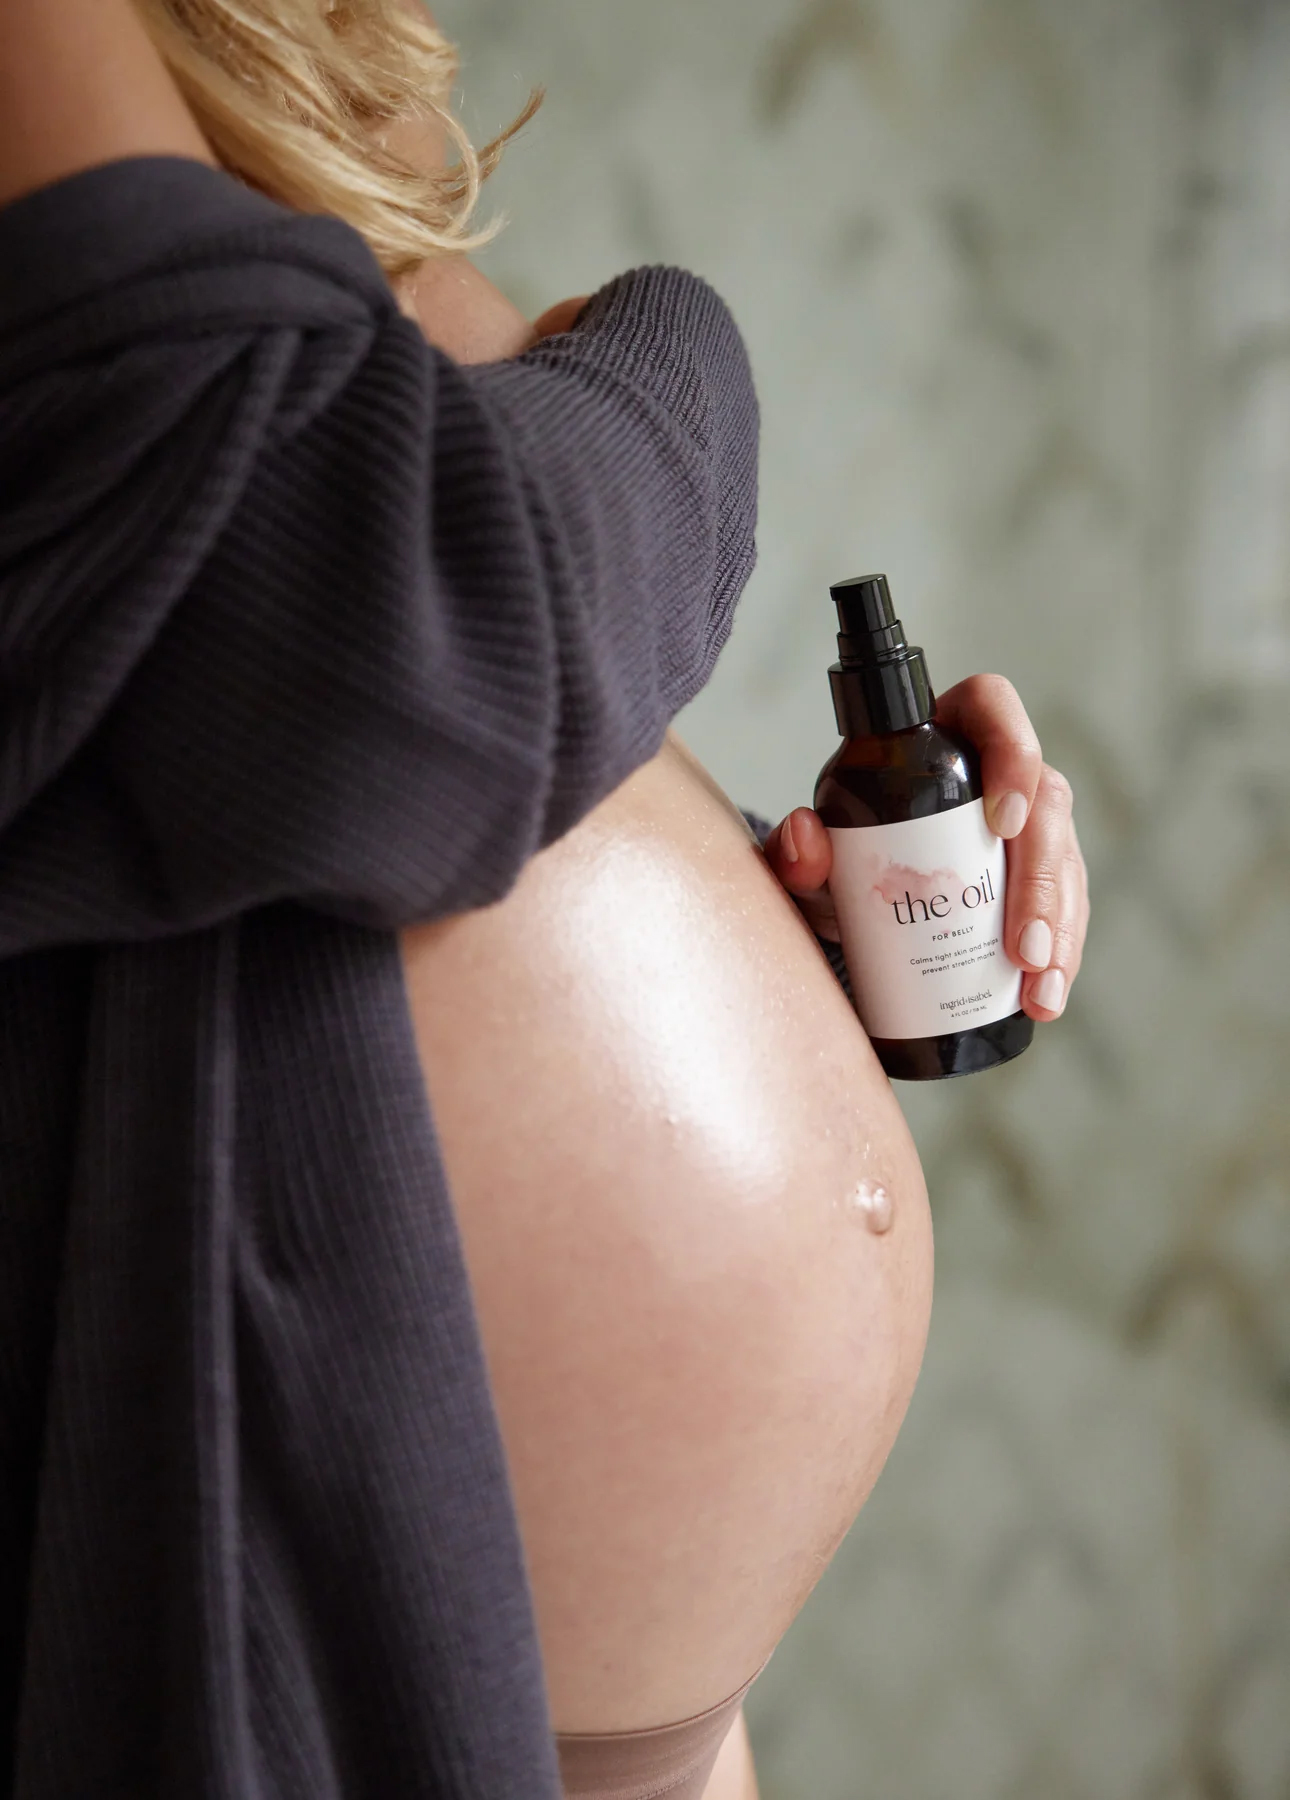 Side view of a pregnant belly and a hand holding a bottle of oil.